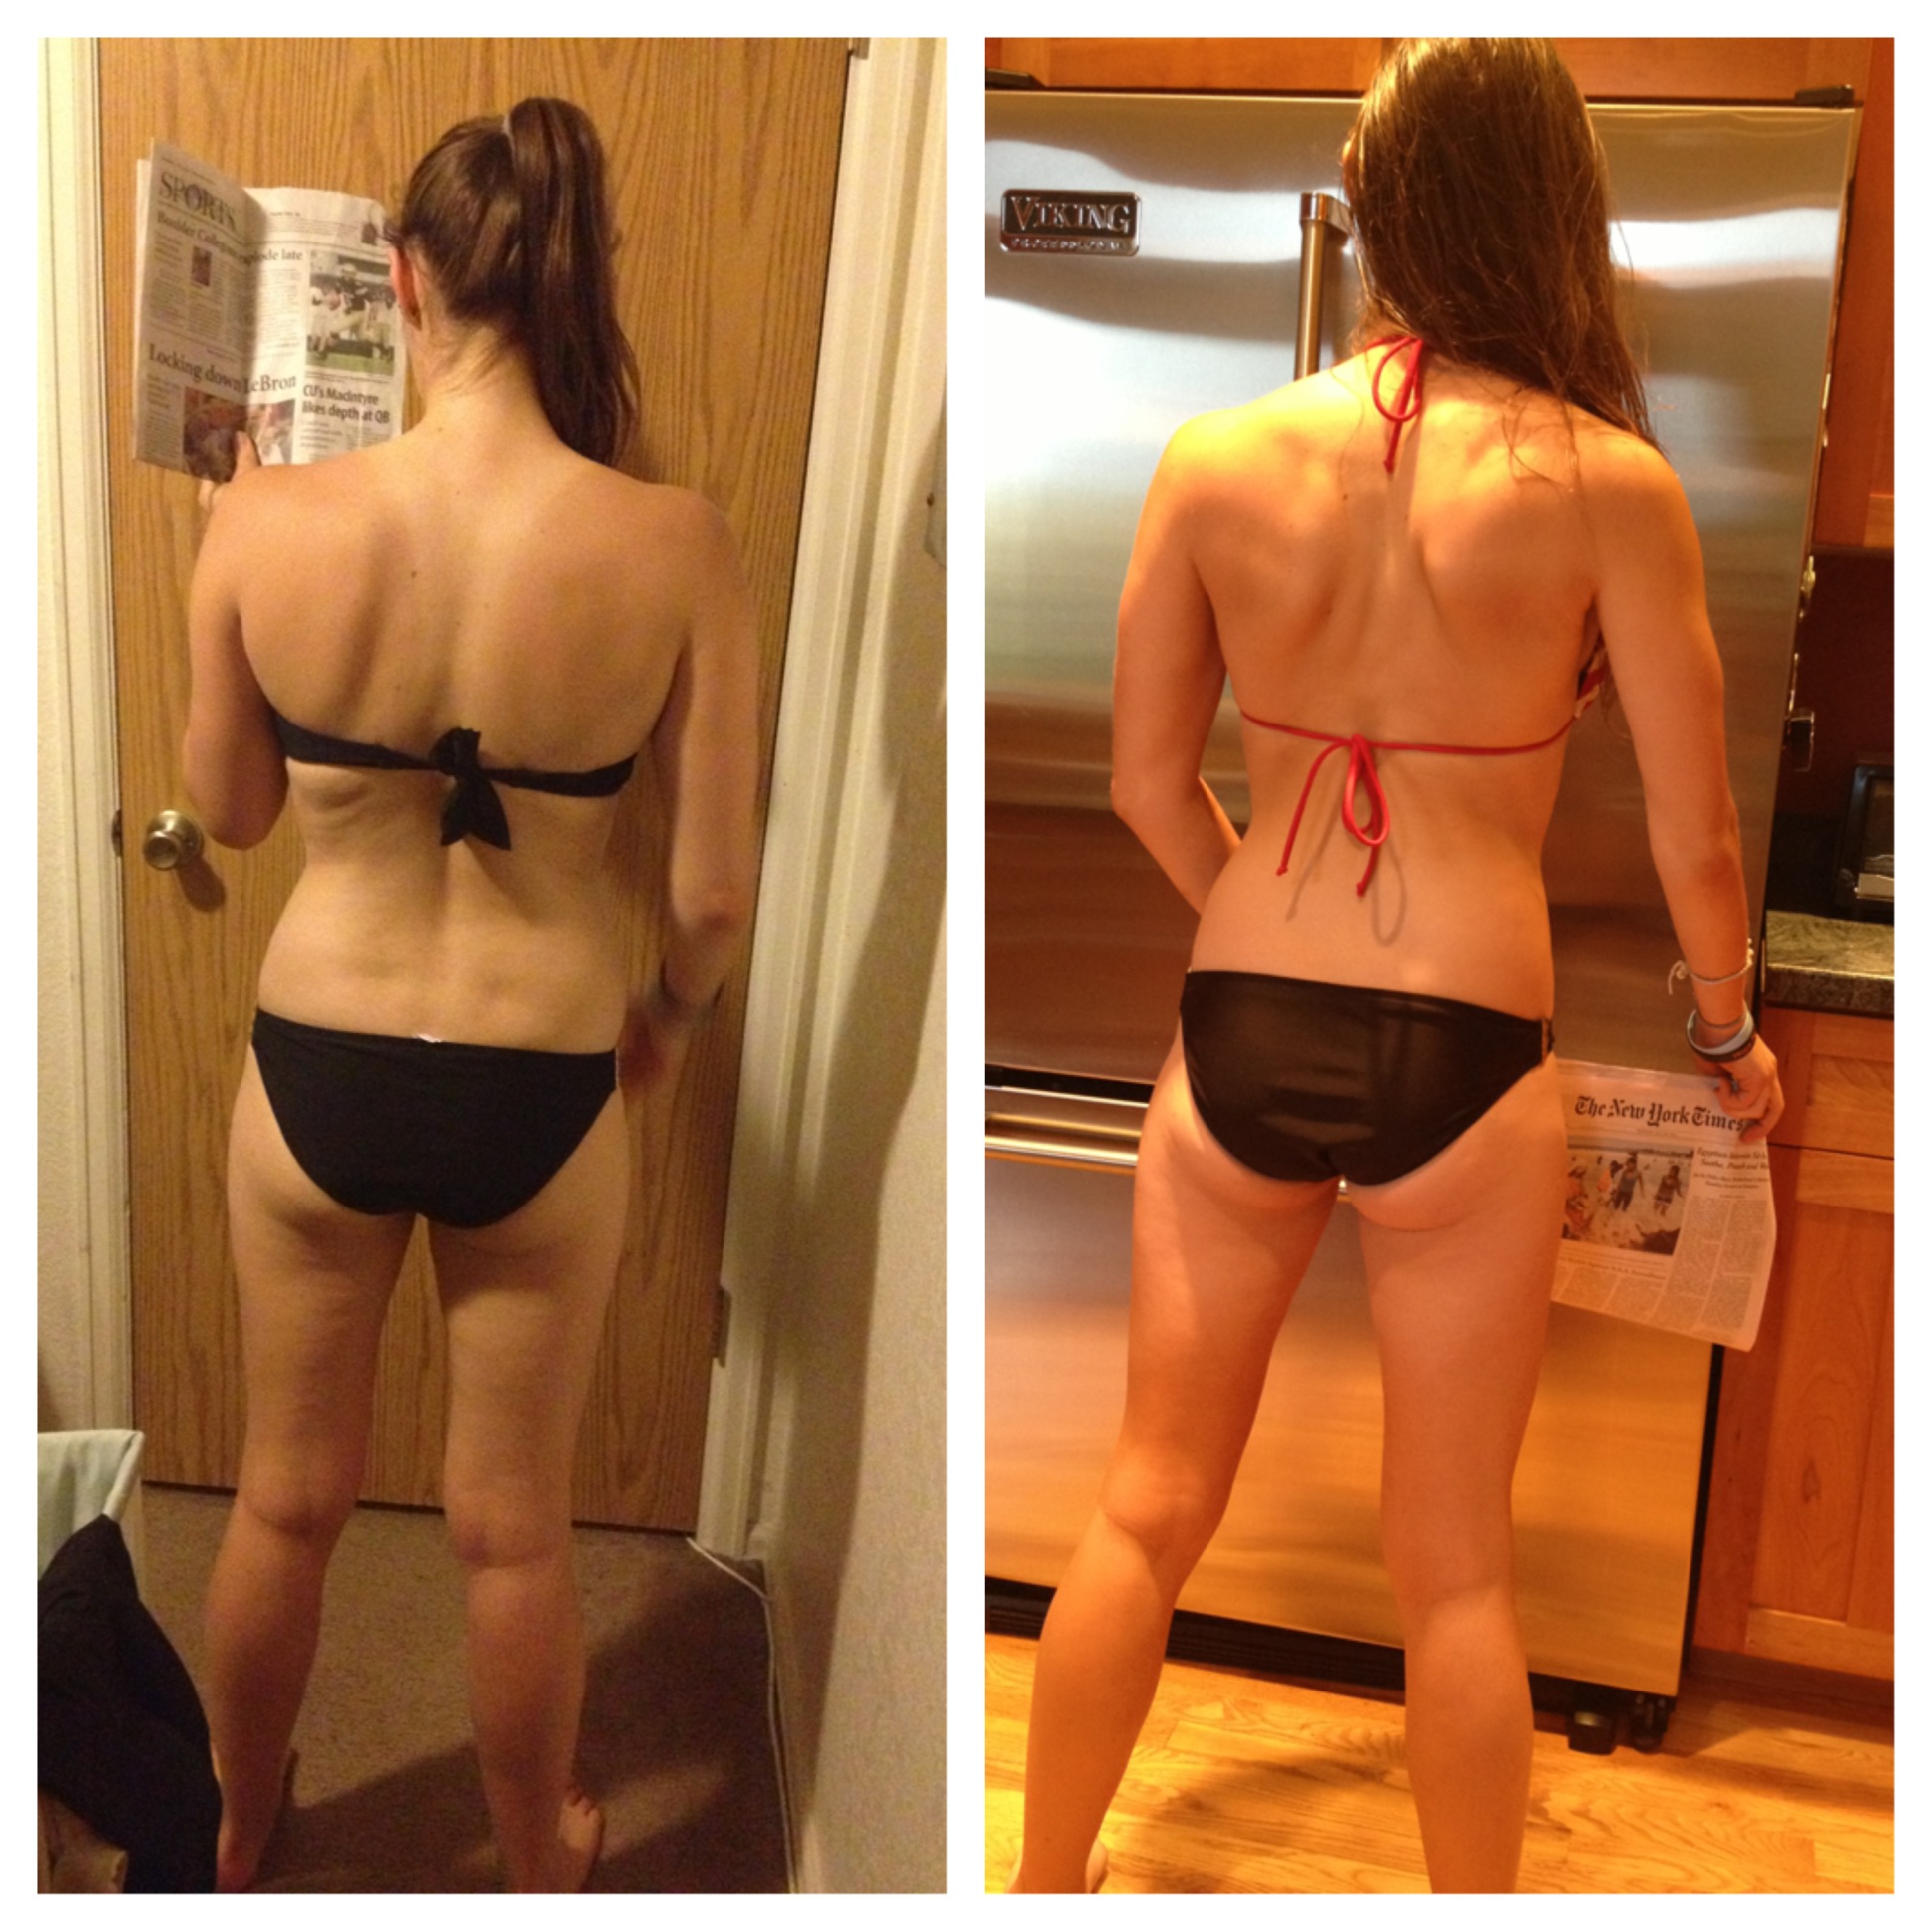 Back shots, before and after